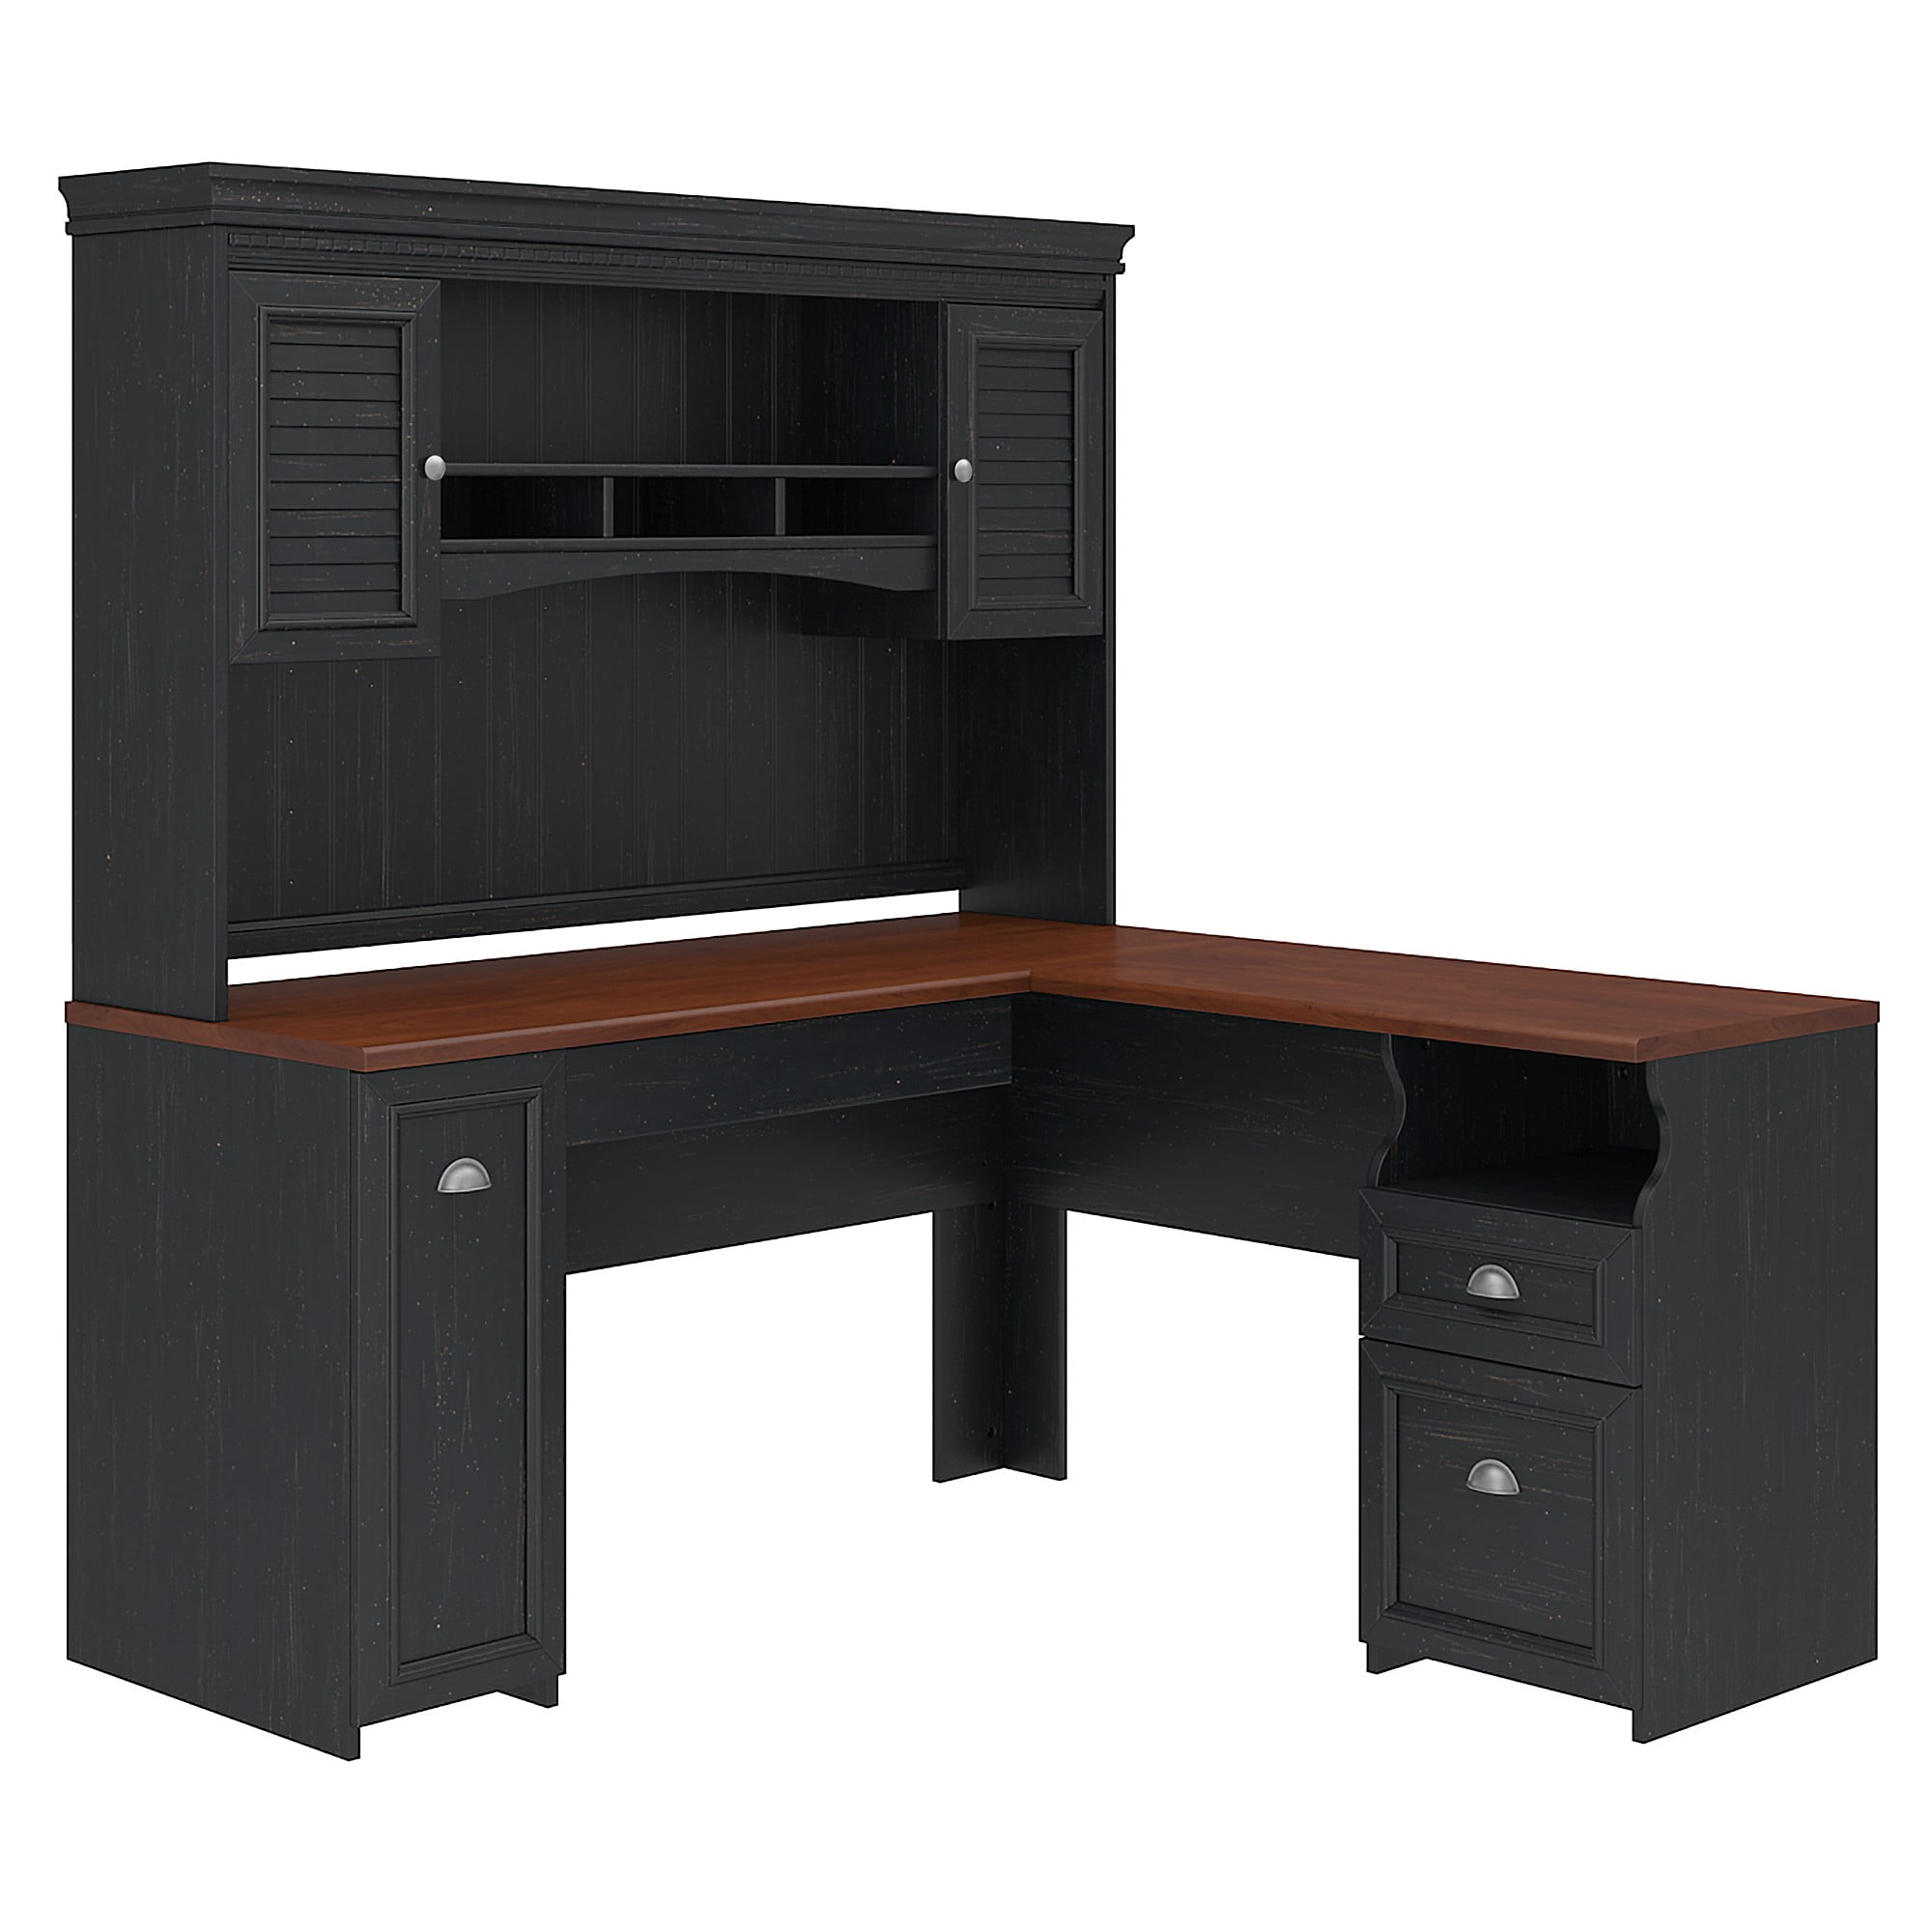 Bush Furniture Fairview L Shaped Desk, Black Desk With Hutch And Drawers